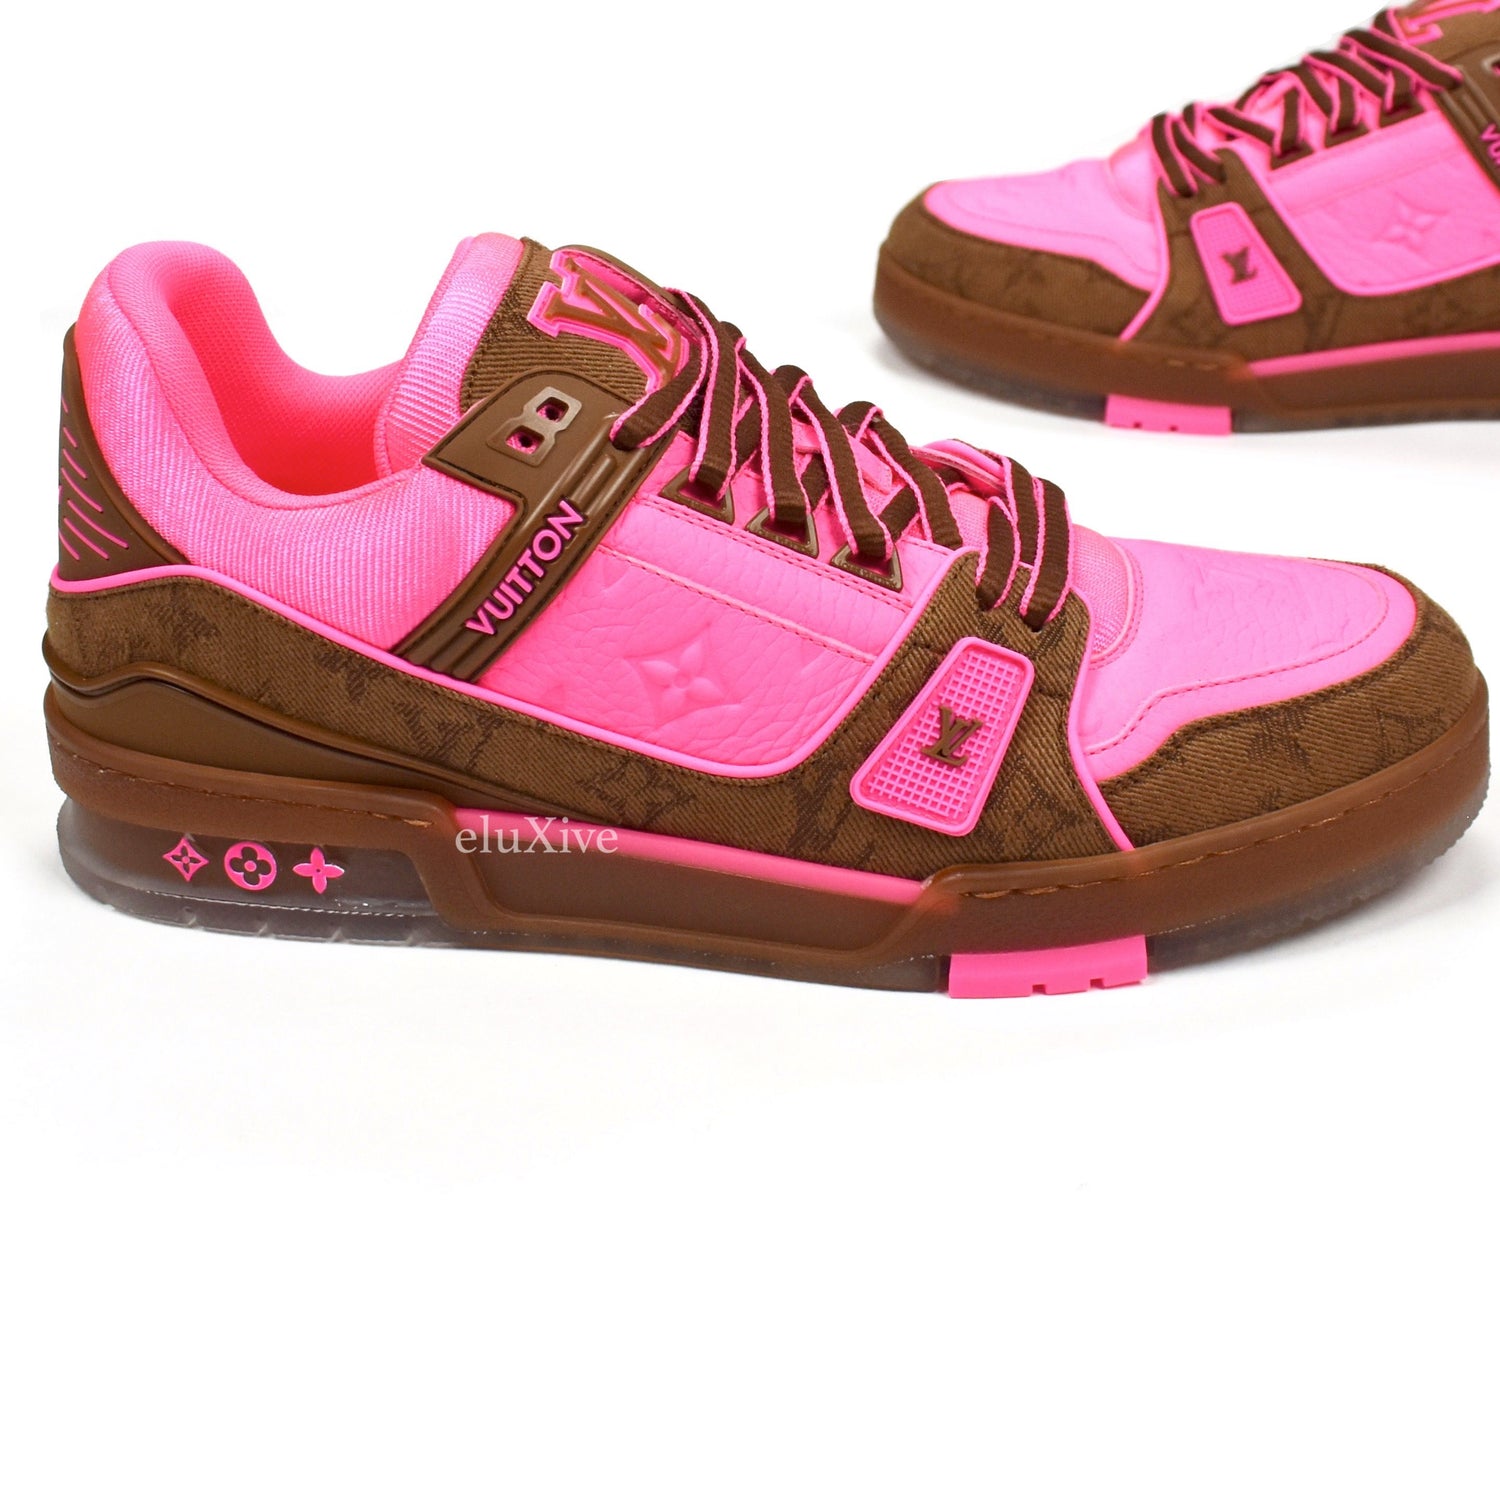 louis vuitton trainer pink and brown｜TikTok Search